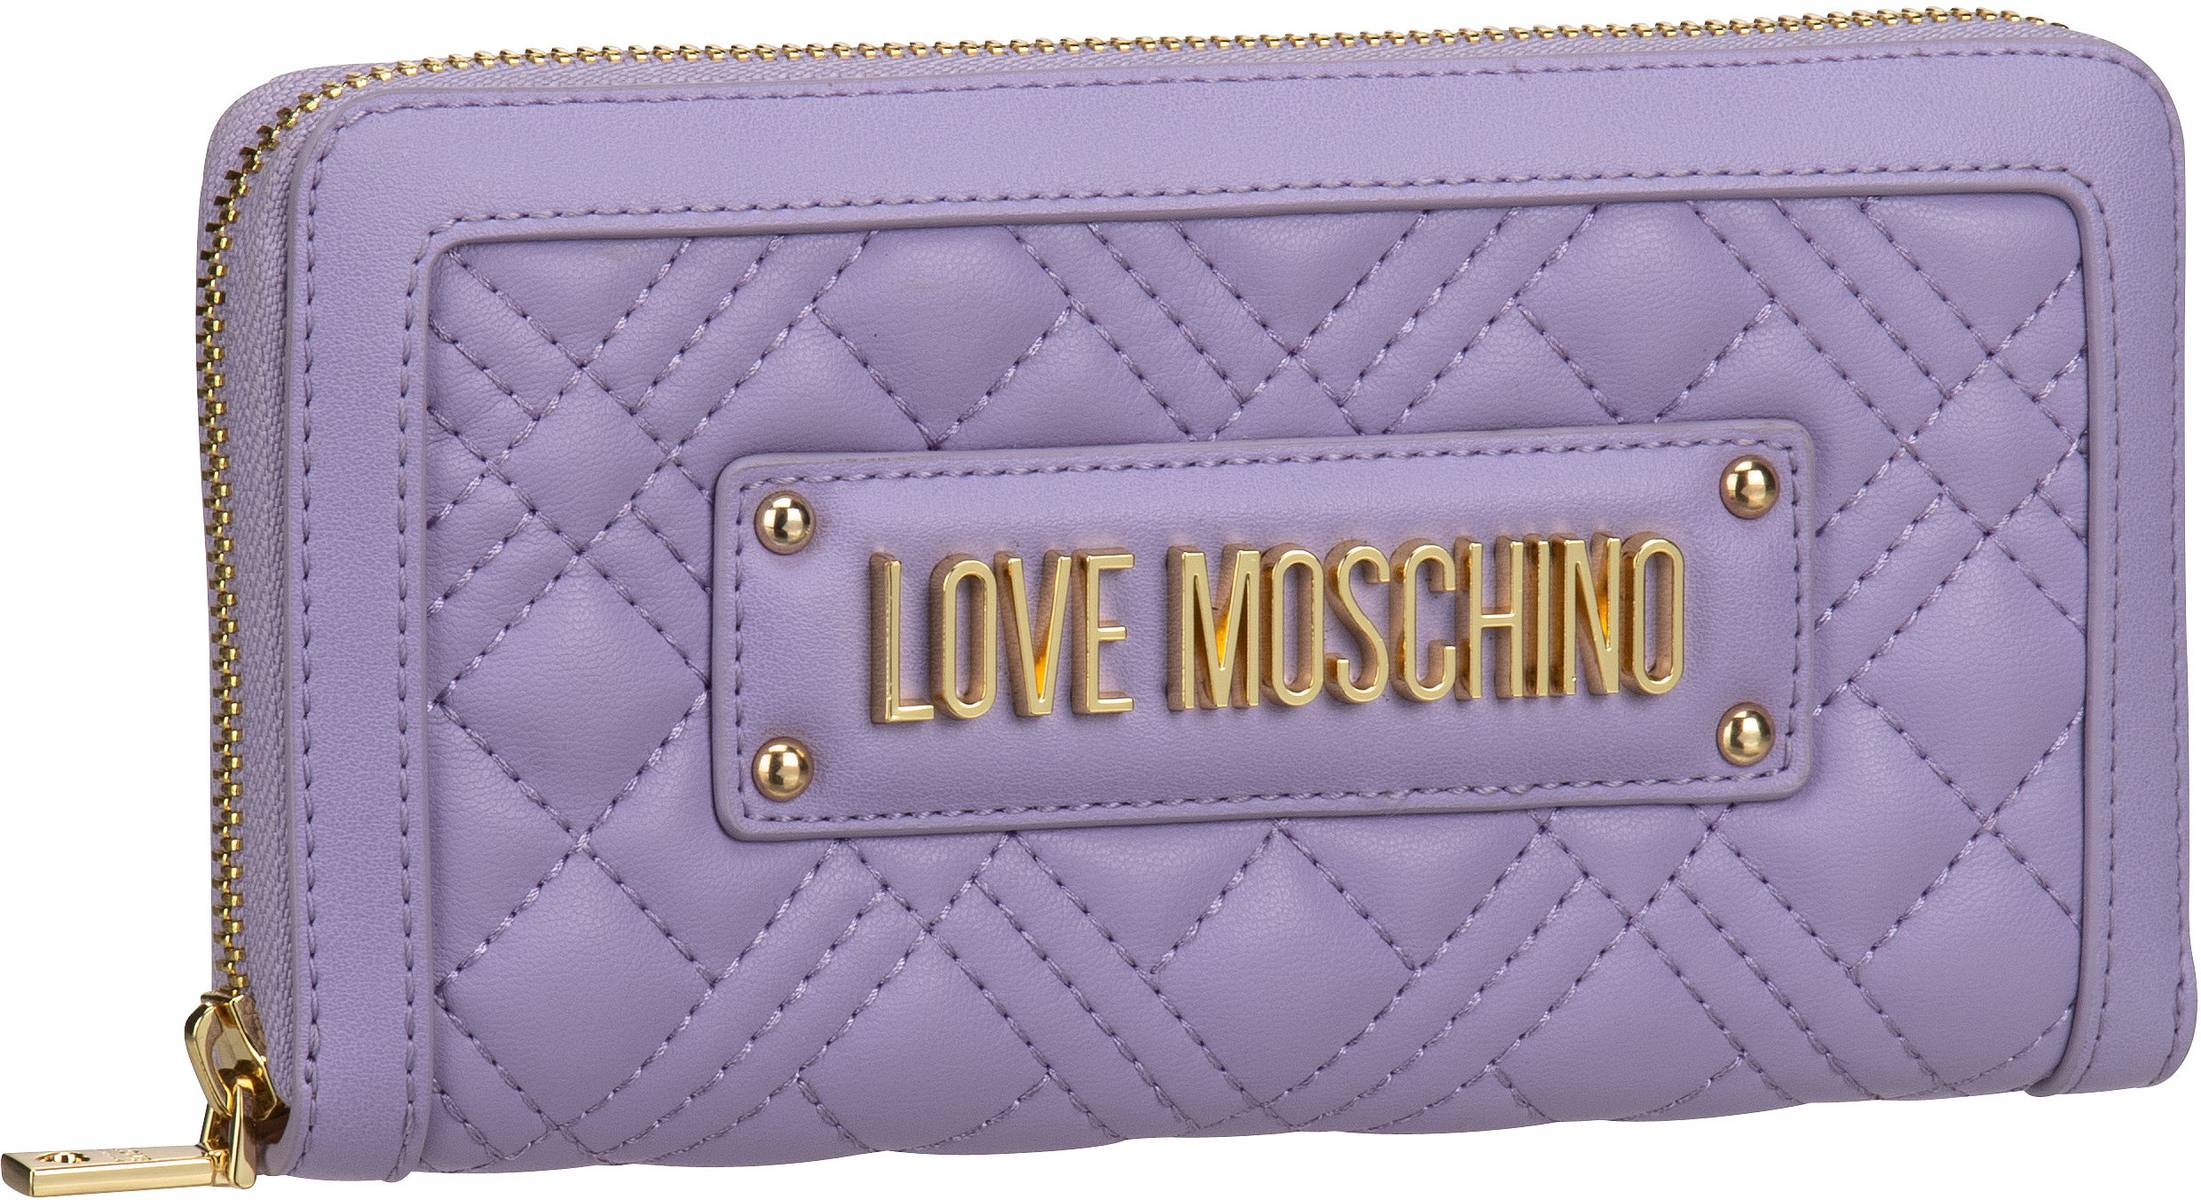 Love Moschino Quilted Wallet 5600 - Lilac